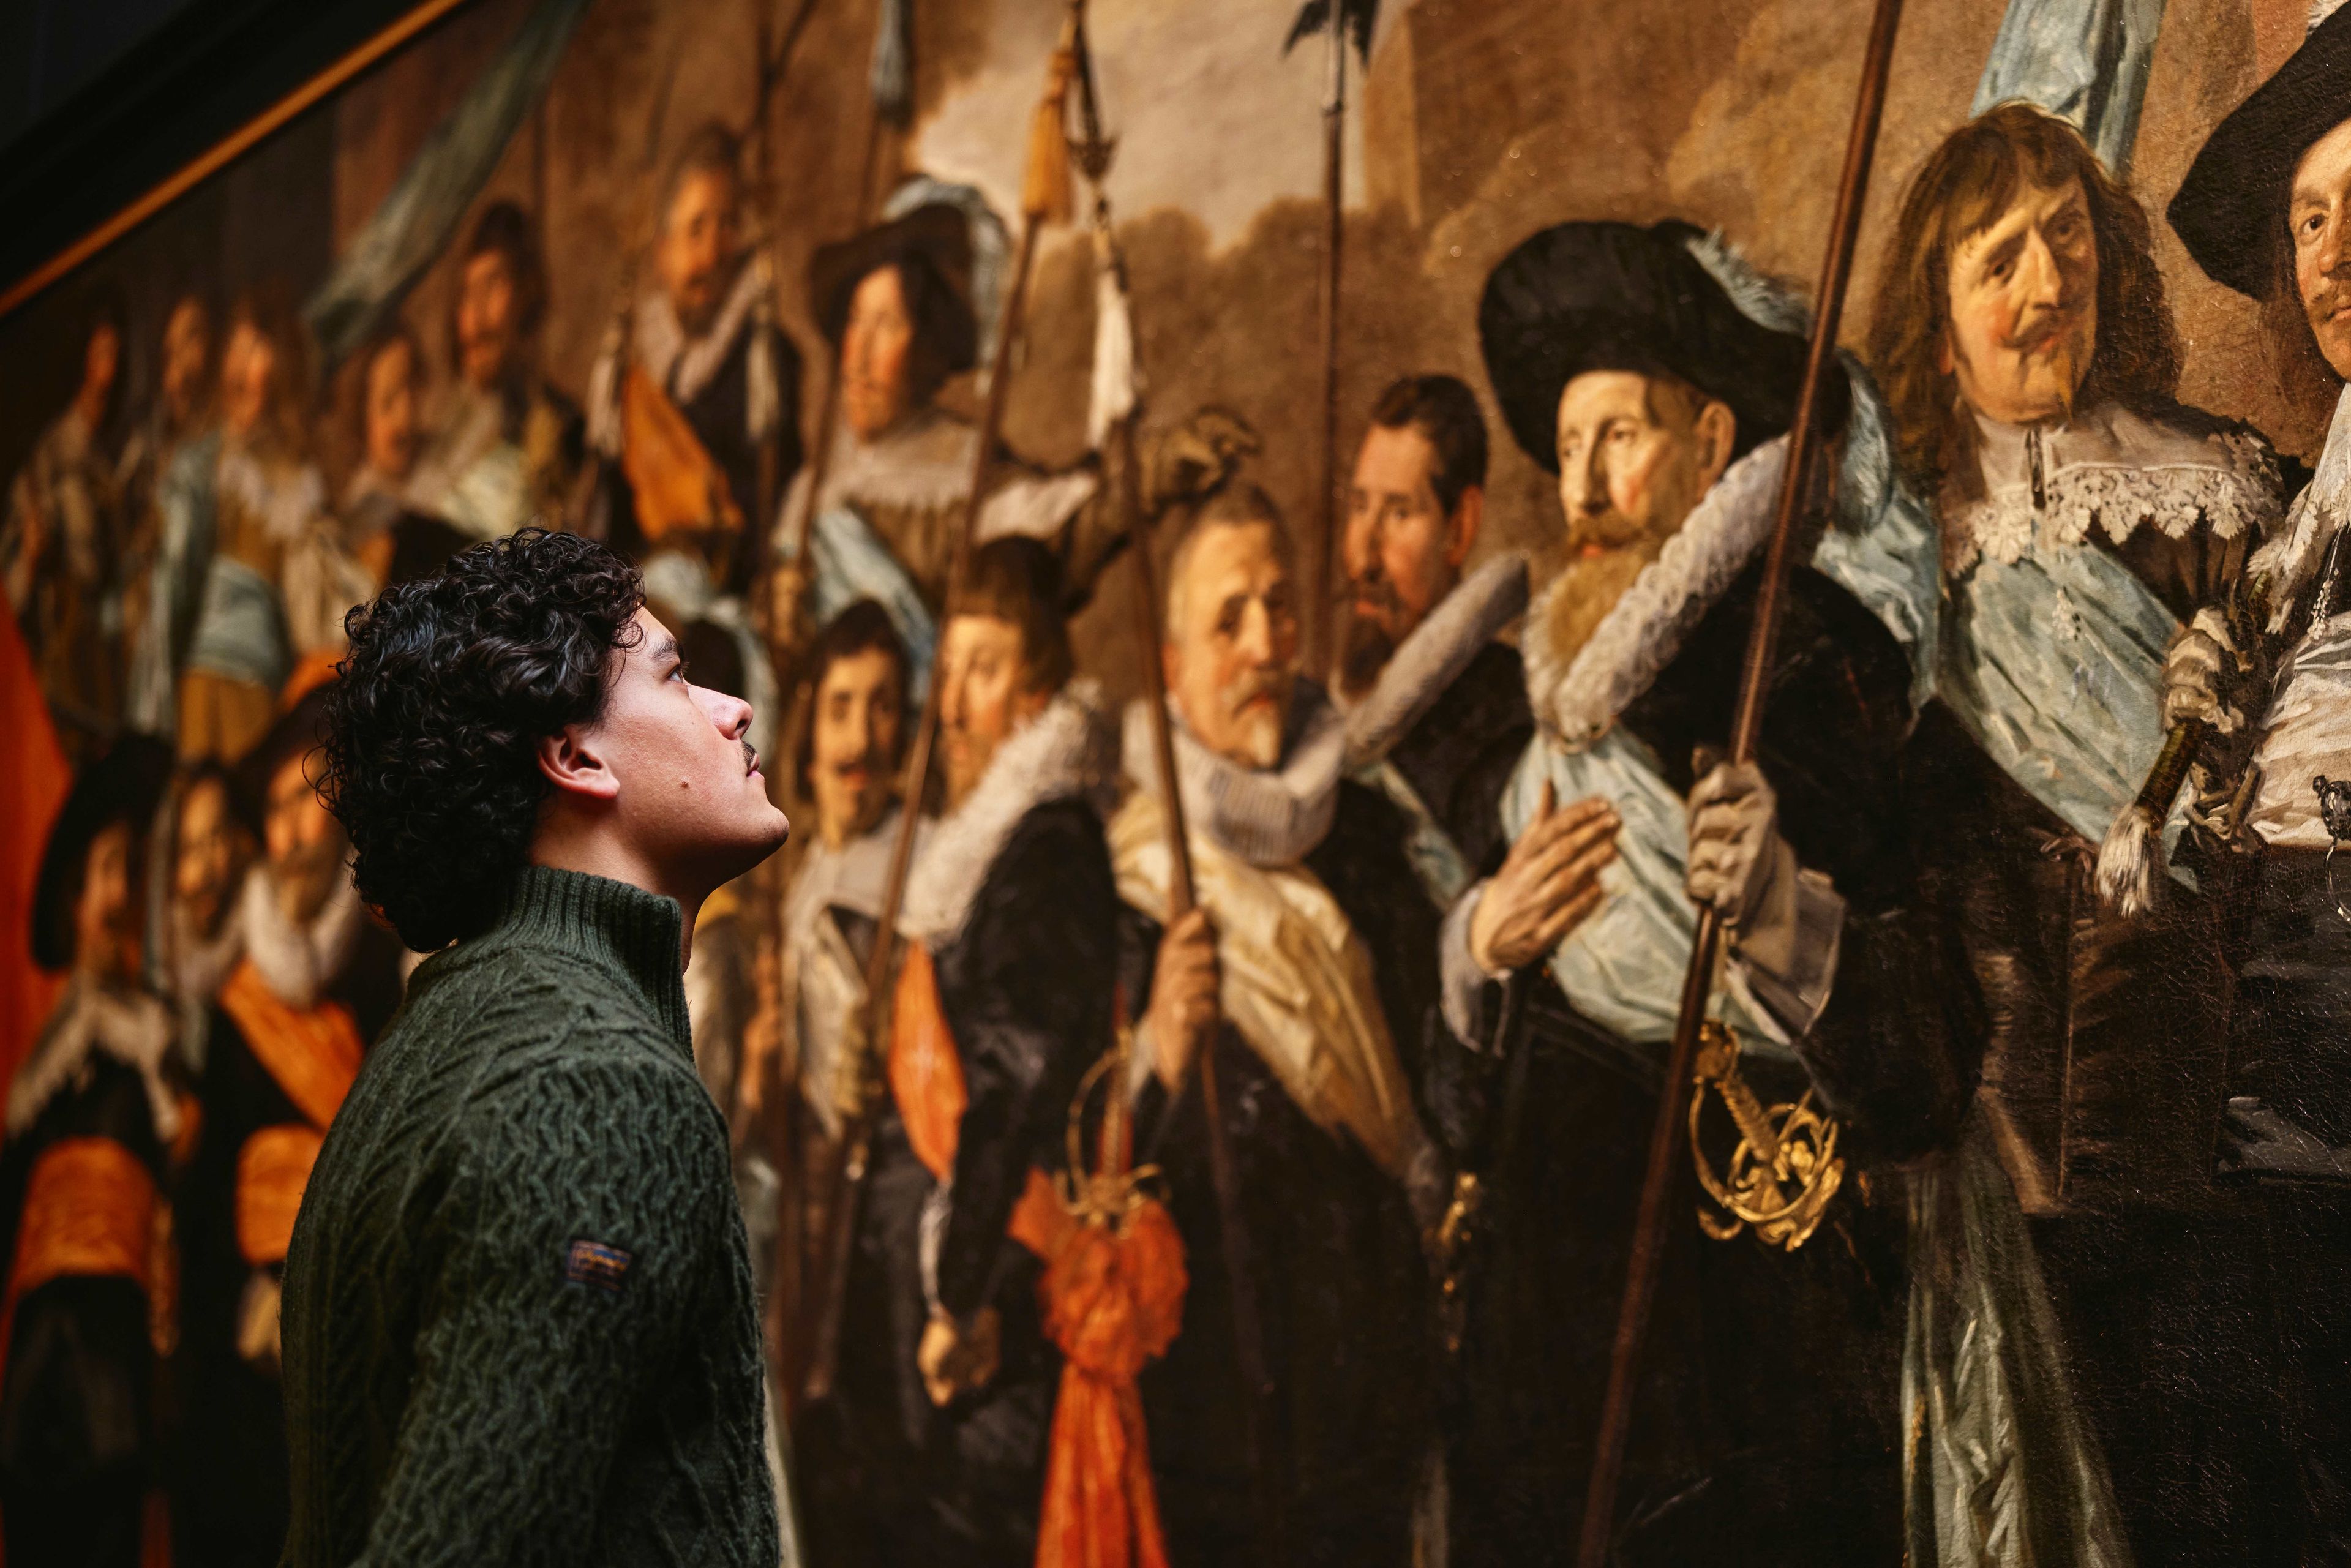 Visitor looking at a group portrait of civic guards by Frans Hals at the Frans Hals Museum 